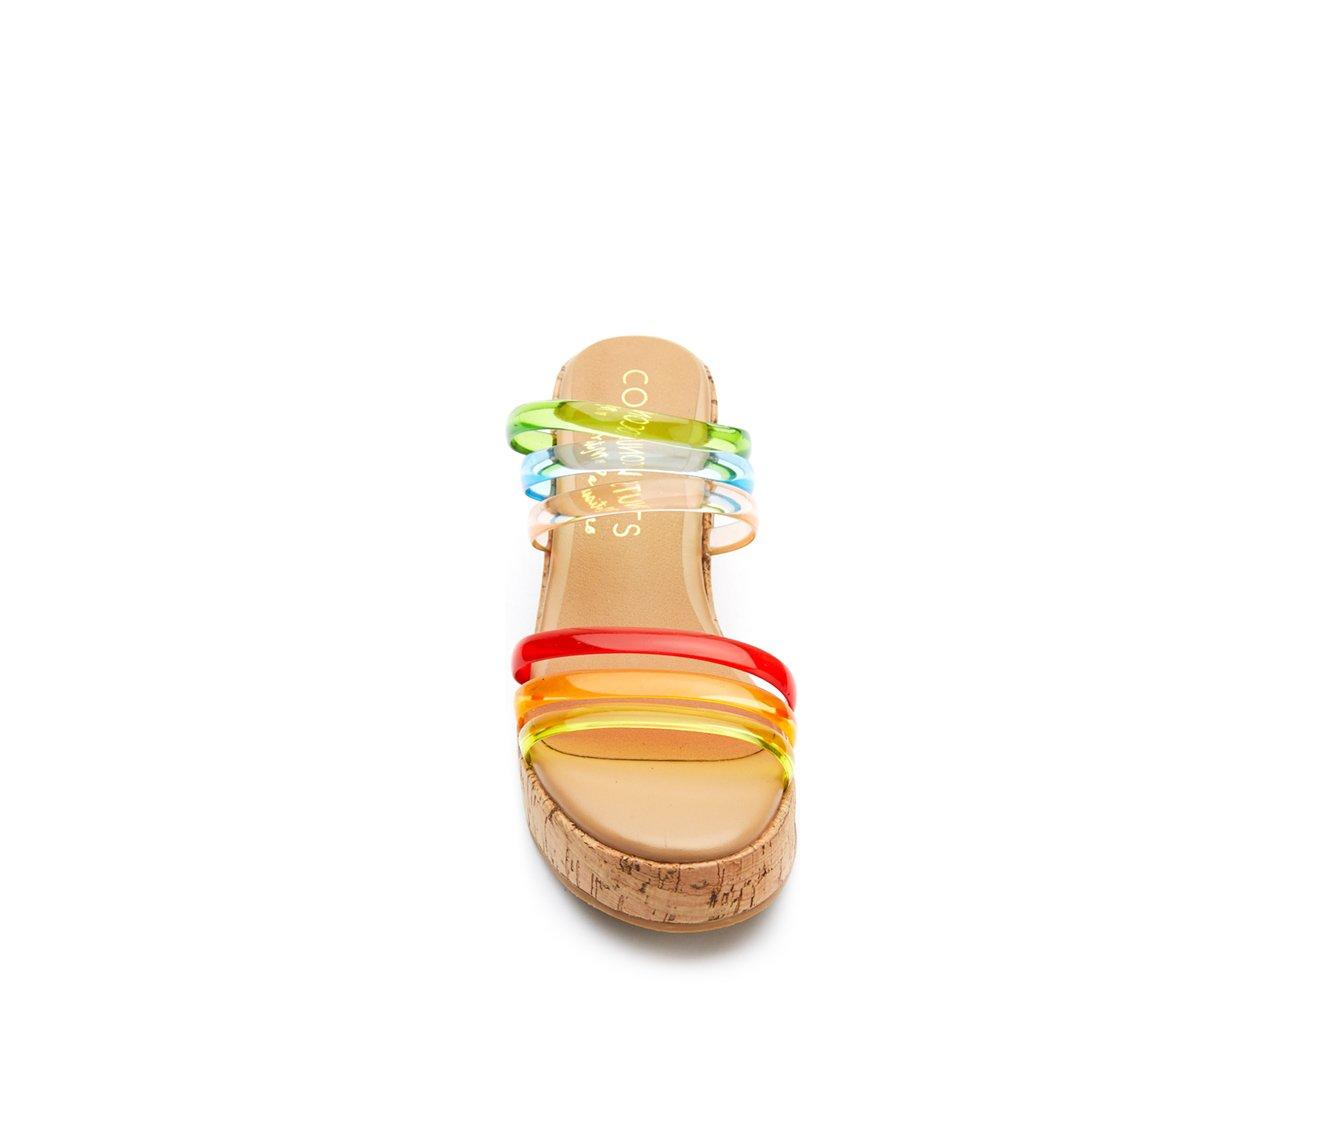 Women's Coconuts by Matisse Mecca Wedge Sandals